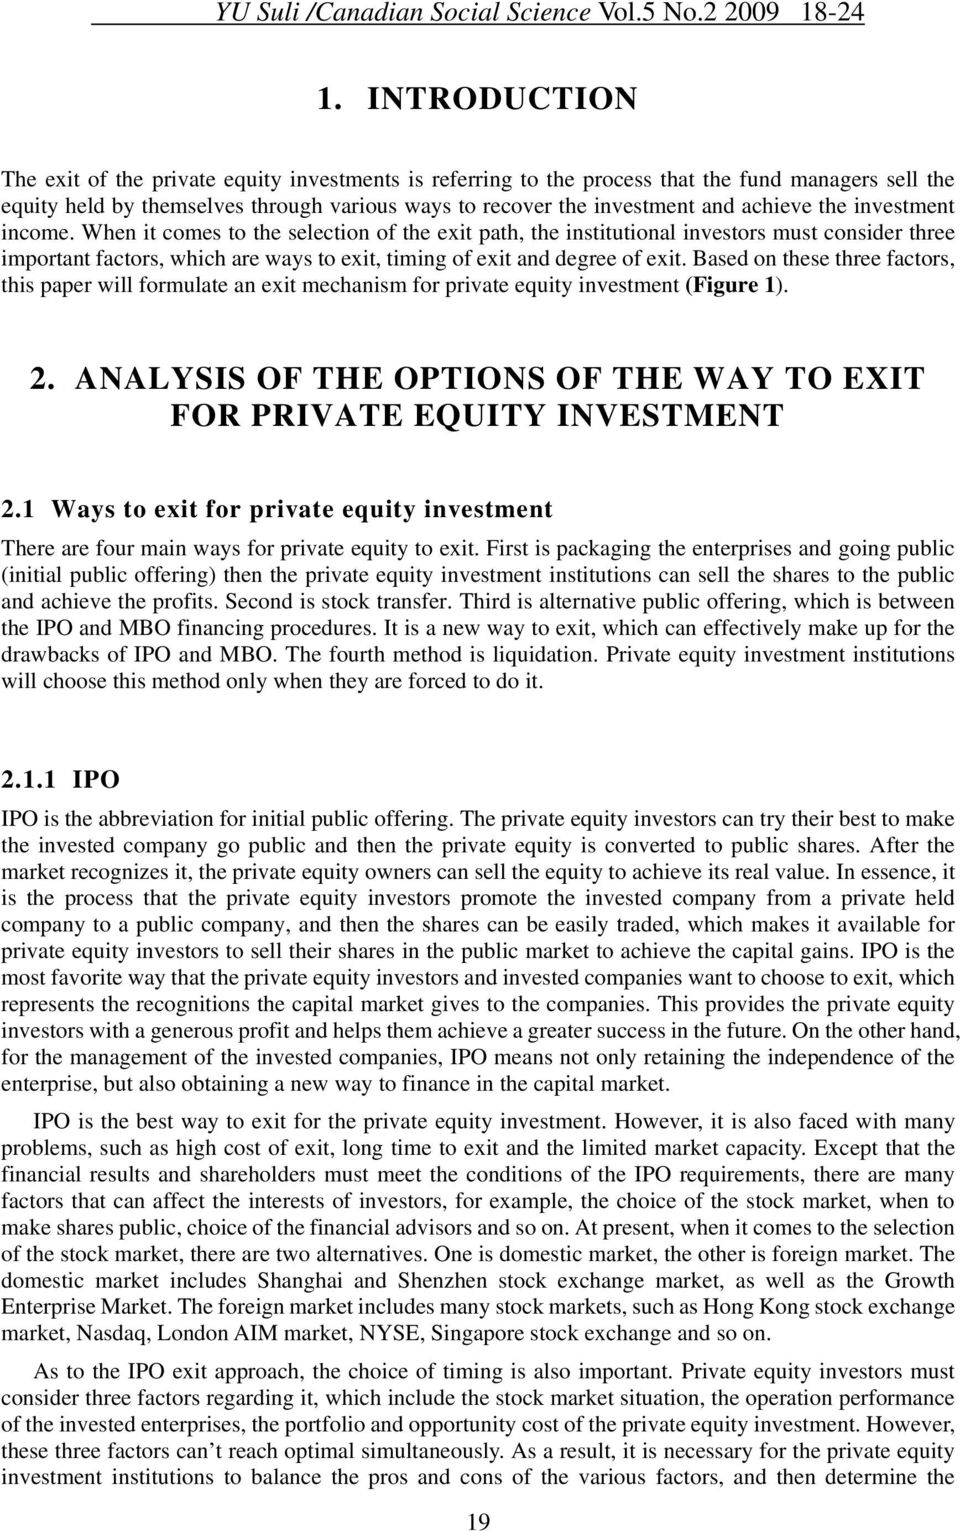 When it comes to the selection of the exit path, the institutional investors must consider three important factors, which are ways to exit, timing of exit and degree of exit.